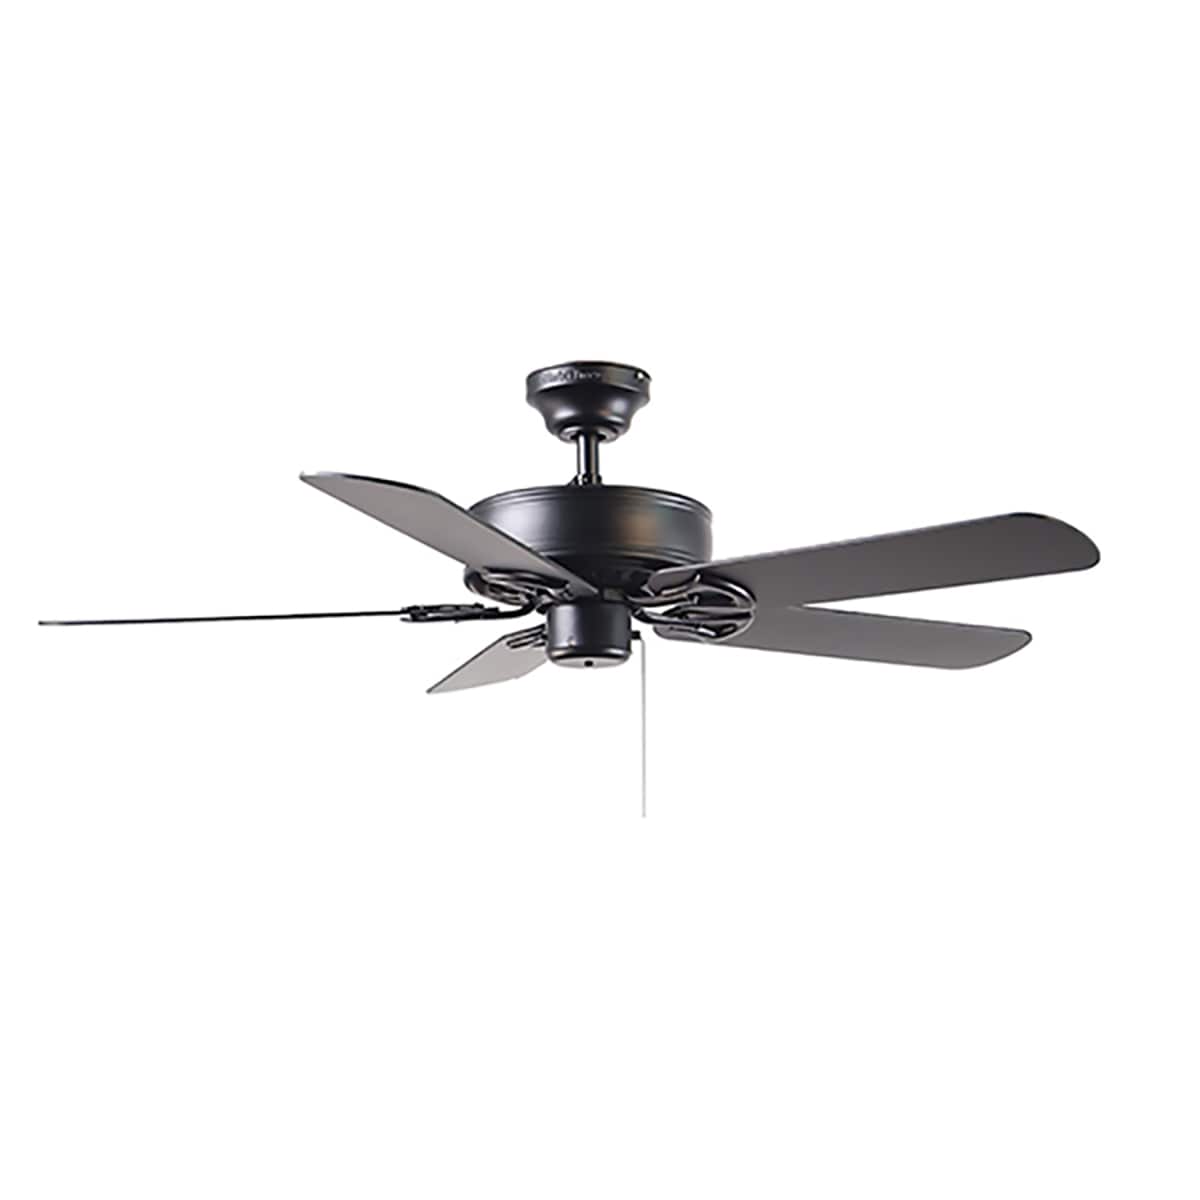 Details about   New Harbor Breeze Classic 52-in Brushed Pewter Finish Indoor Ceiling Fan 5-Blade 